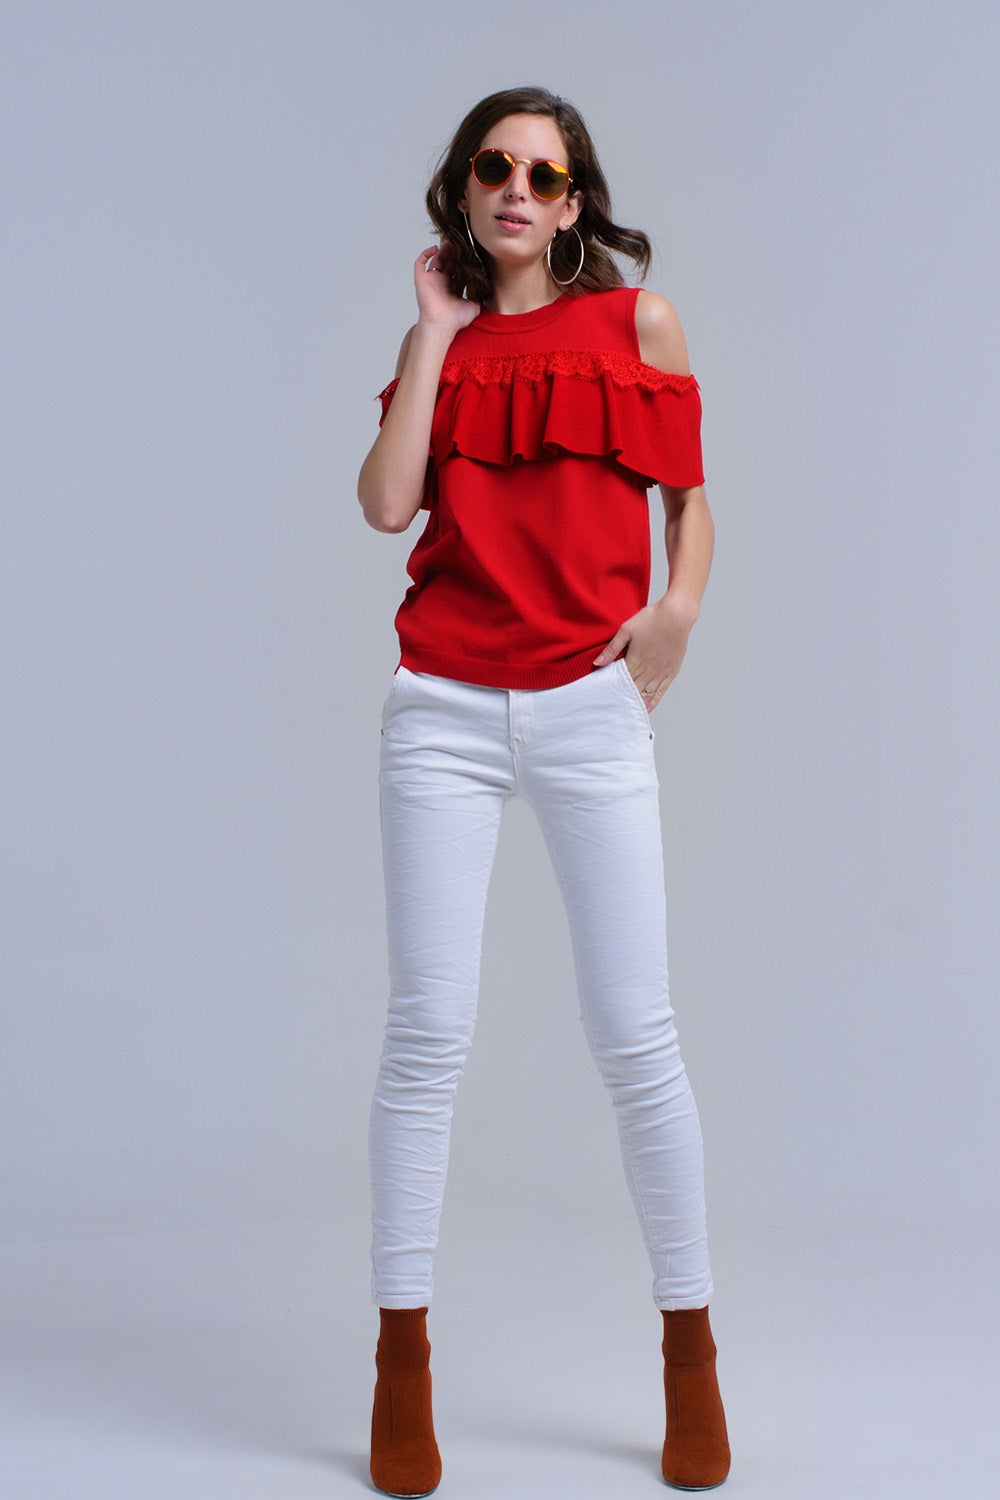 Red Cold Shoulder Sweater With Ruffle and Lace